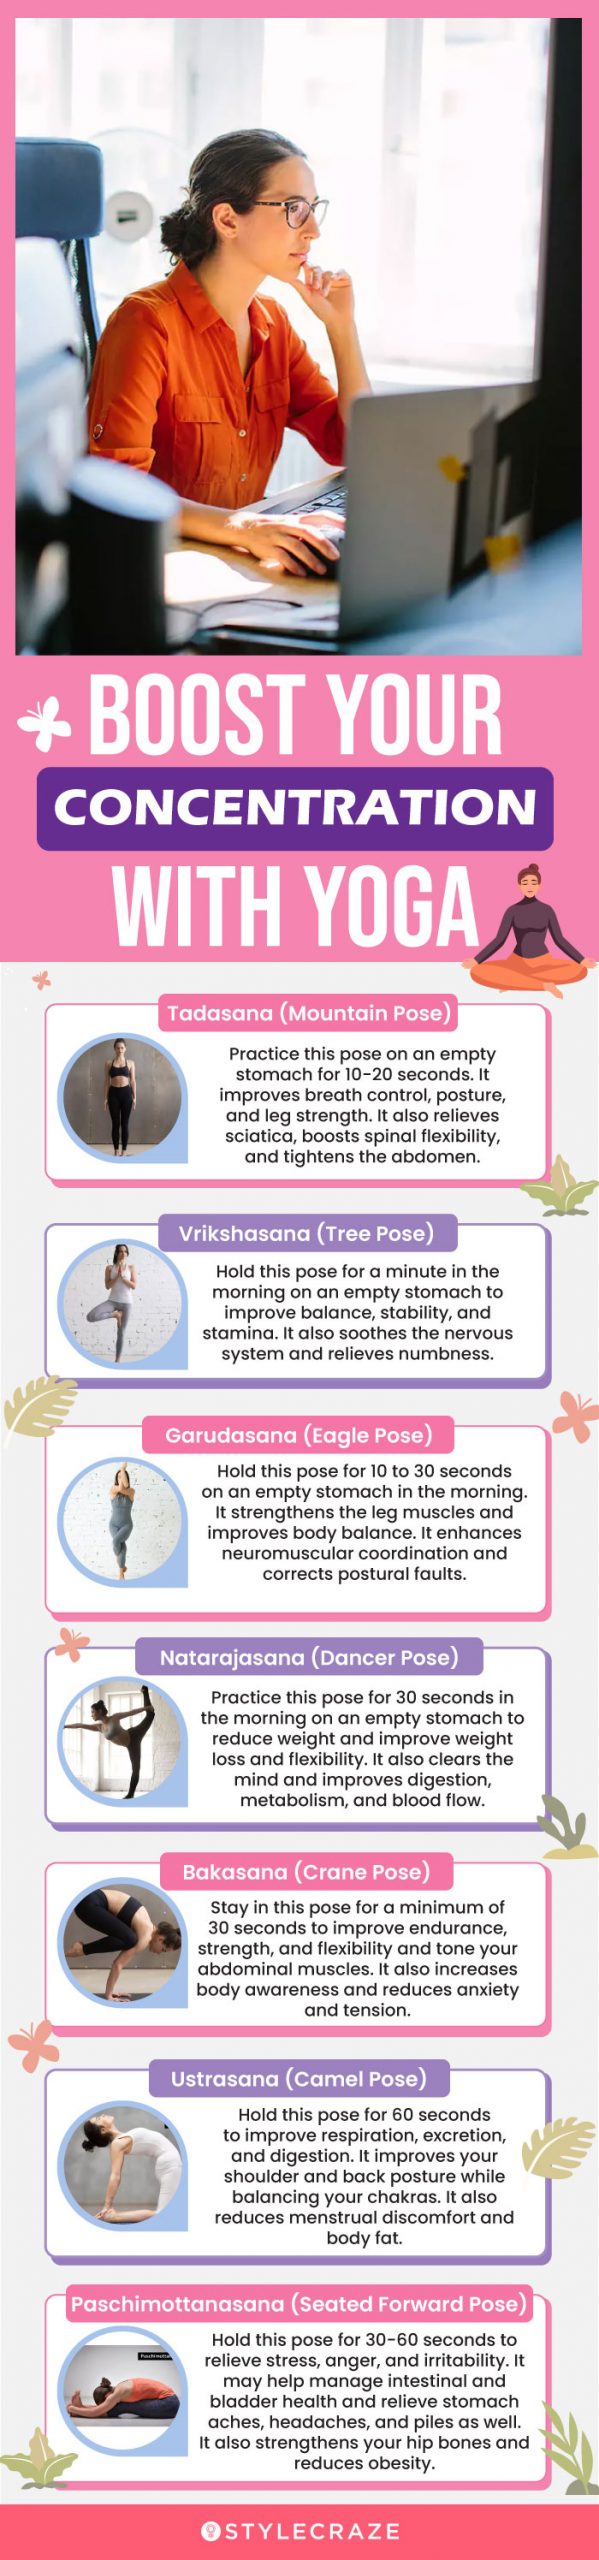 boost your concentration with yoga (infographic)